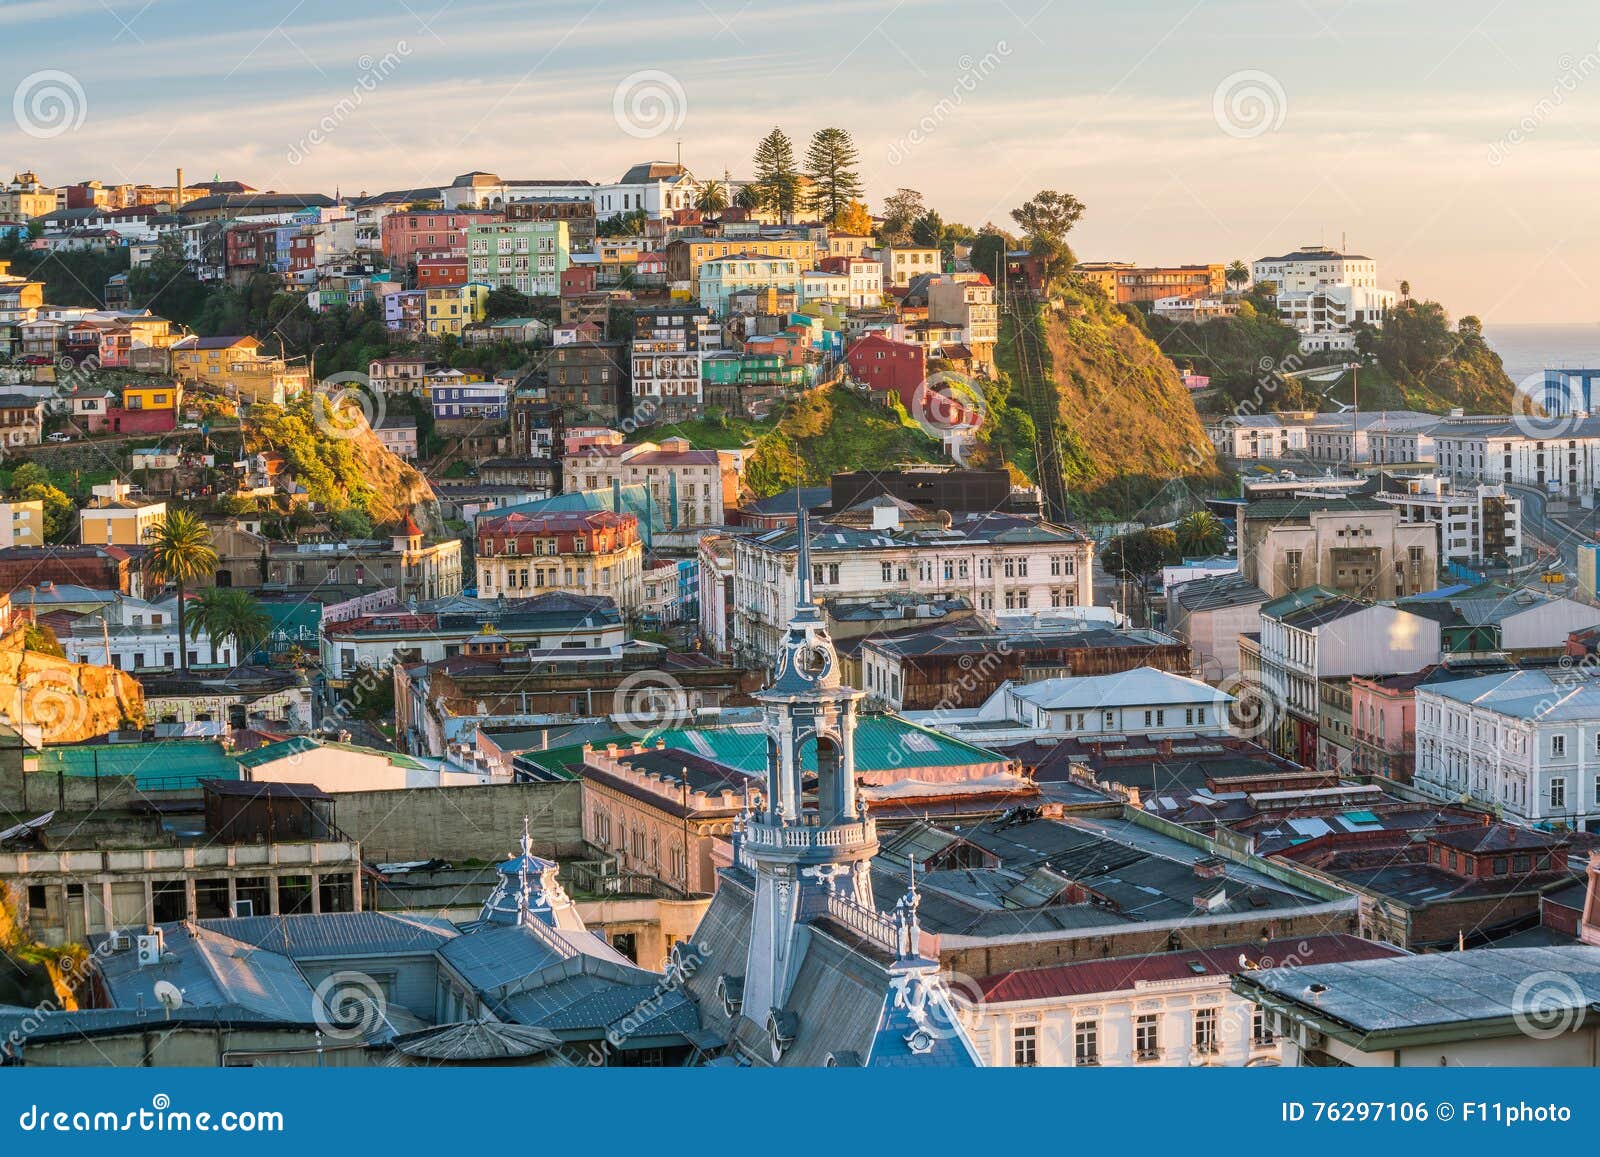 colorful buildings of valparaiso, chile